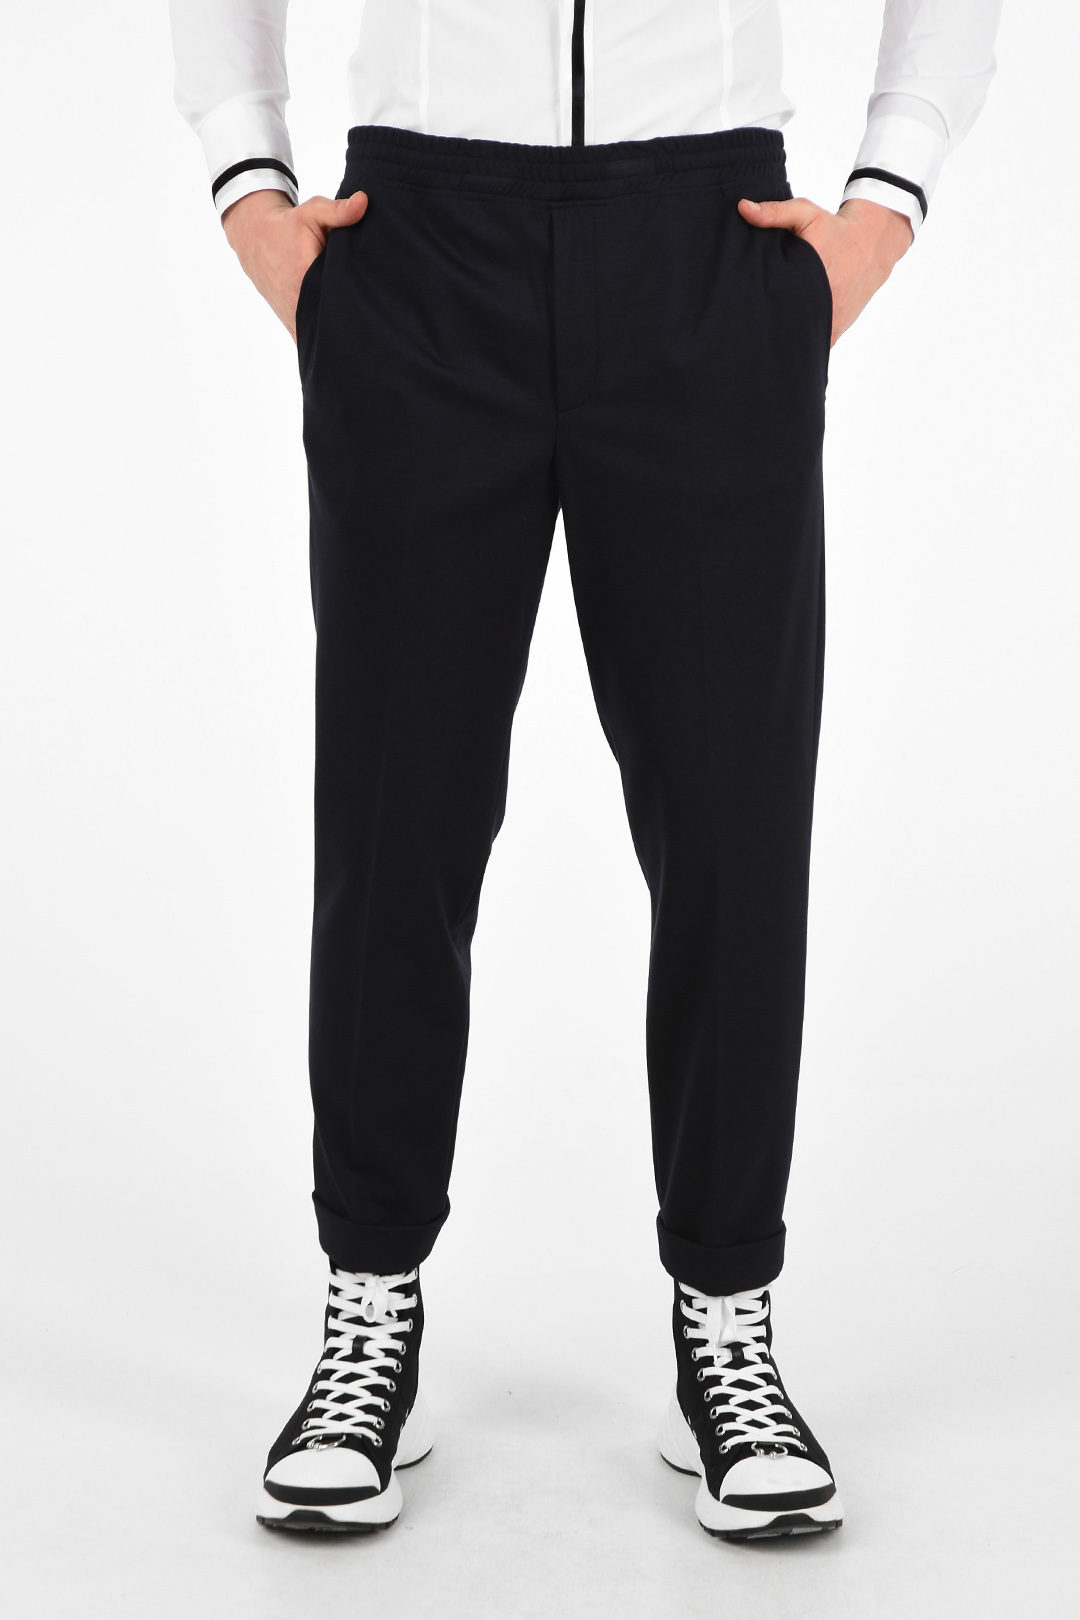 Pants With Drawstring Closure - Buy Pants With Drawstring Closure online in  India